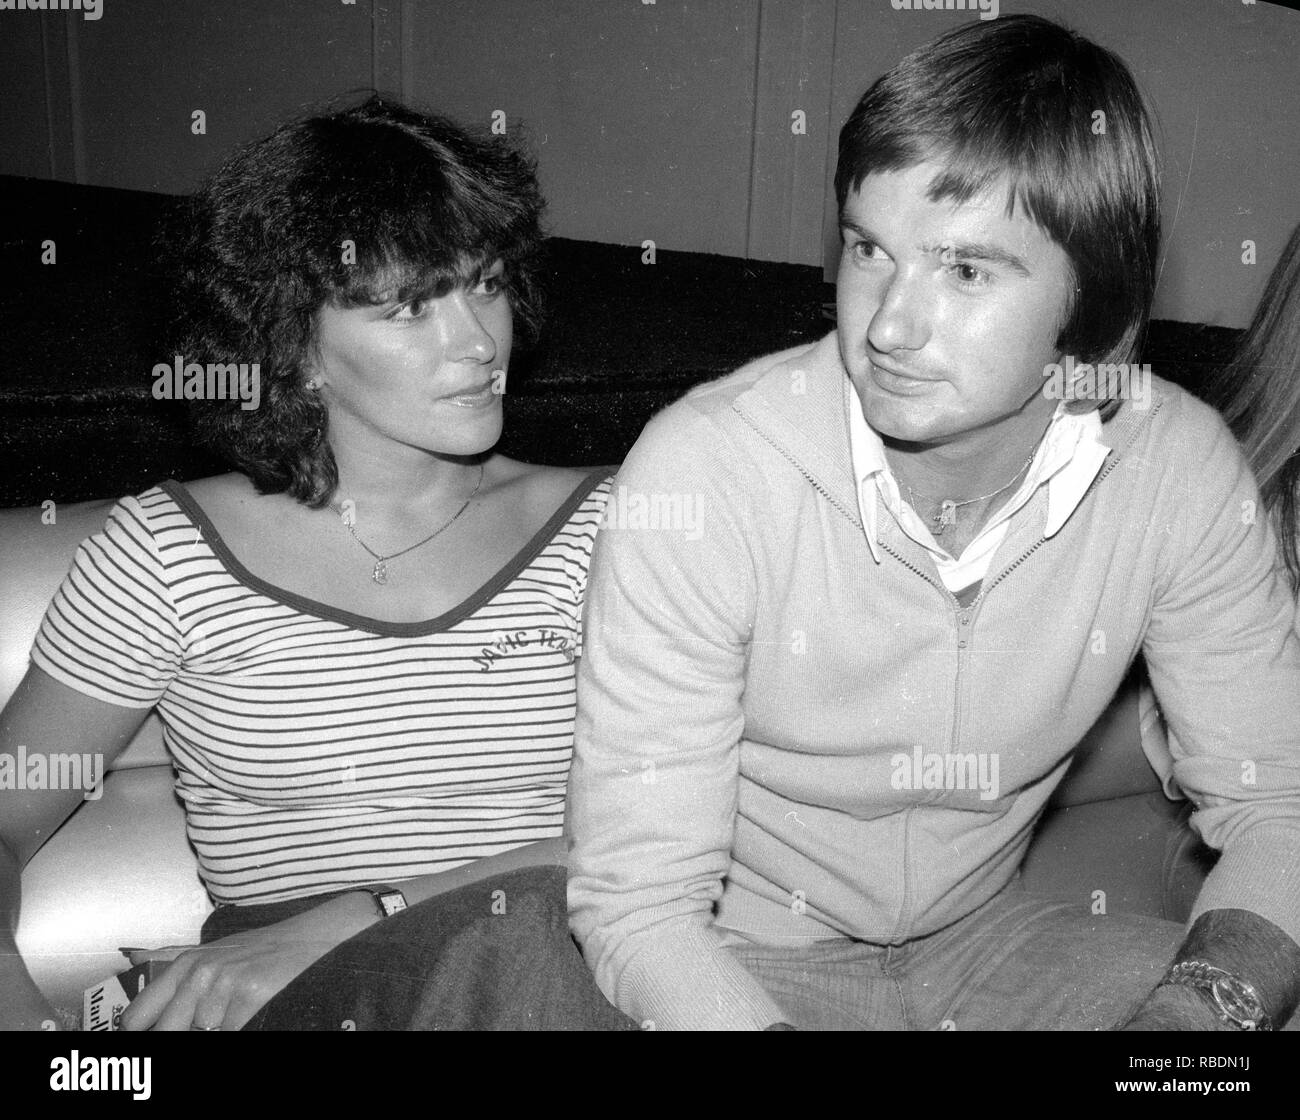 Jimmy connors 1978 Black and White Stock Photos & Images - Alamy